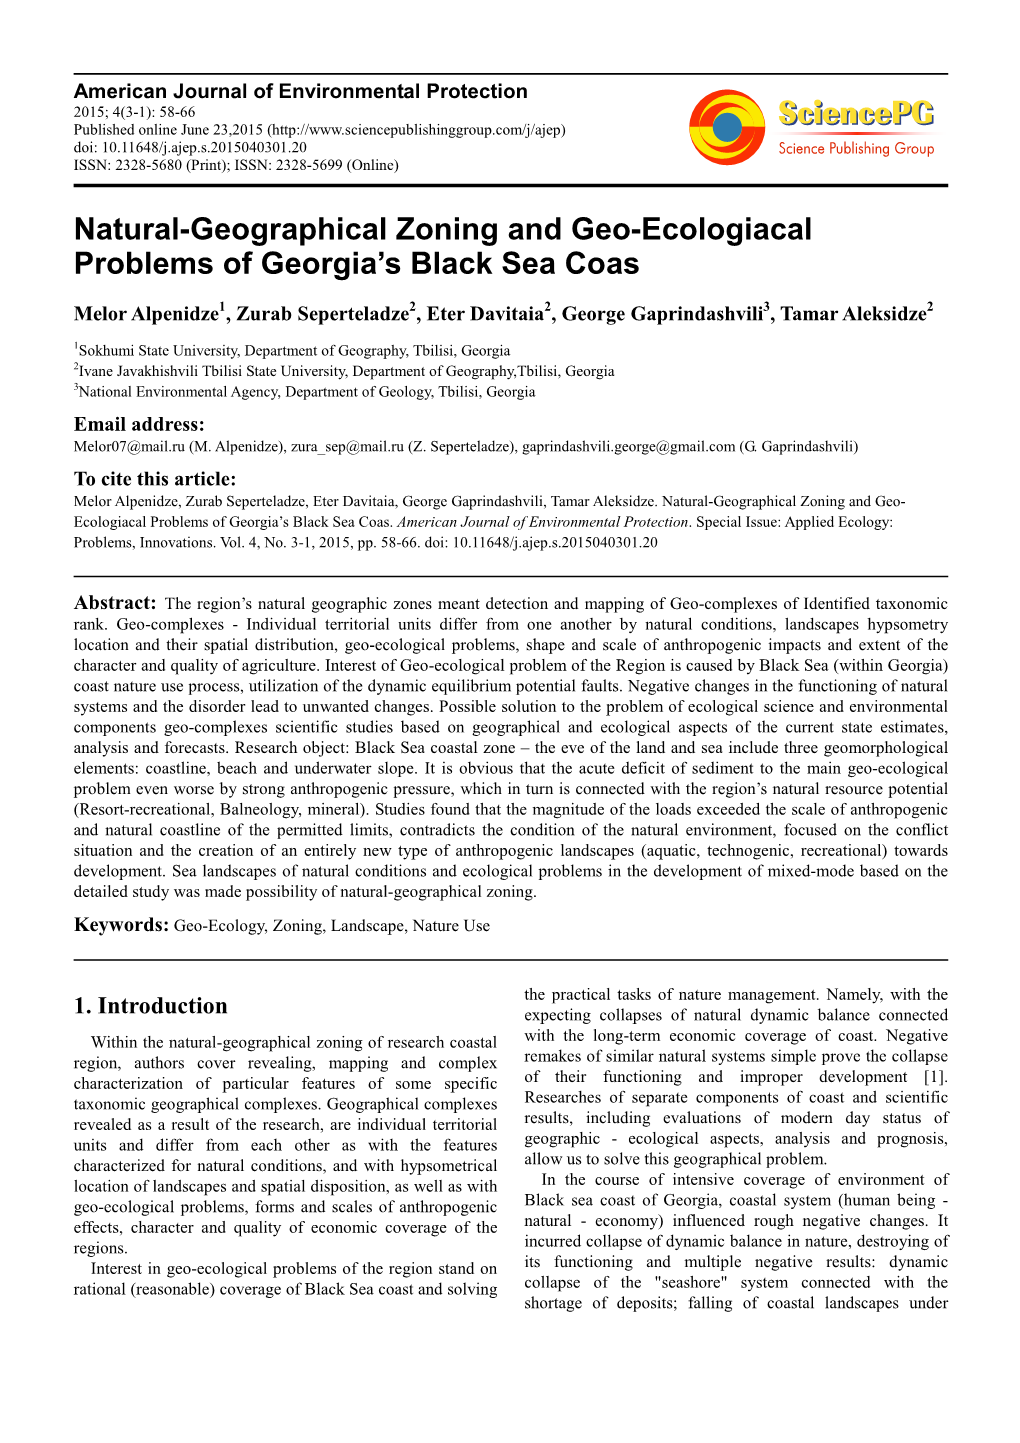 Natural-Geographical Zoning and Geo-Ecologiacal Problems of Georgia's